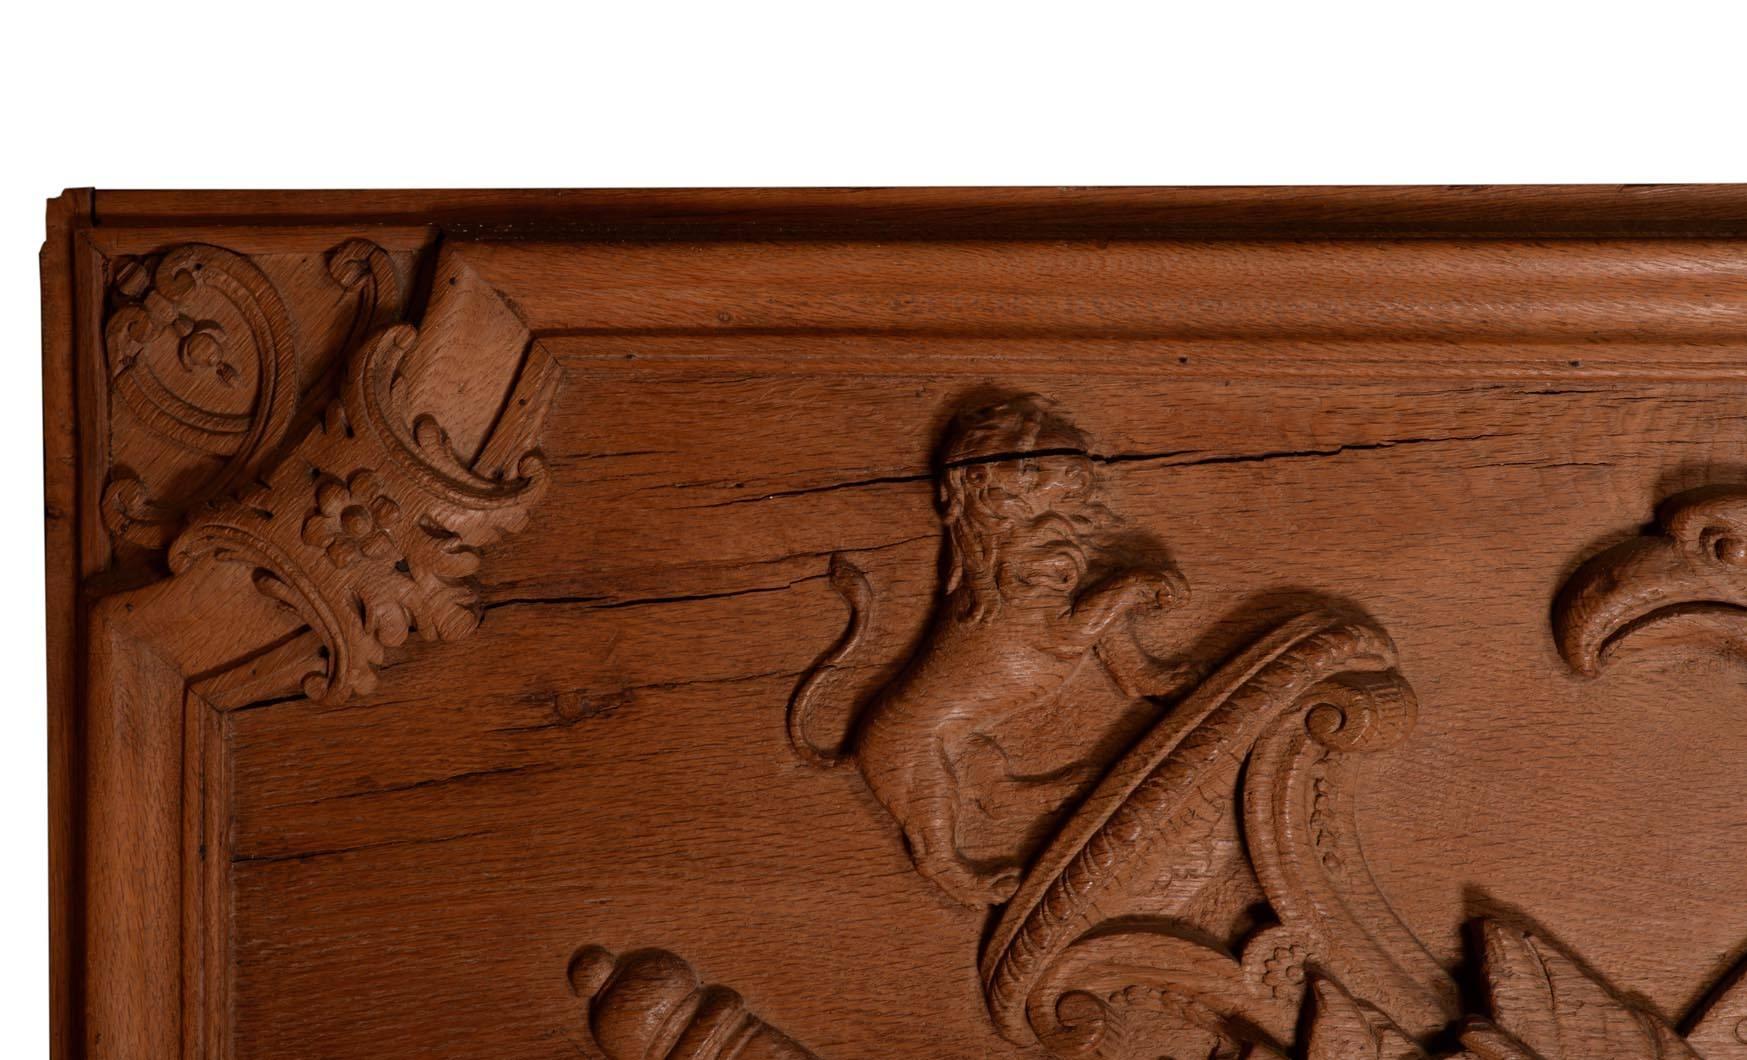 Carved Oakwood Panel Decorated with Trophies of Arms, 19th Century For Sale 1